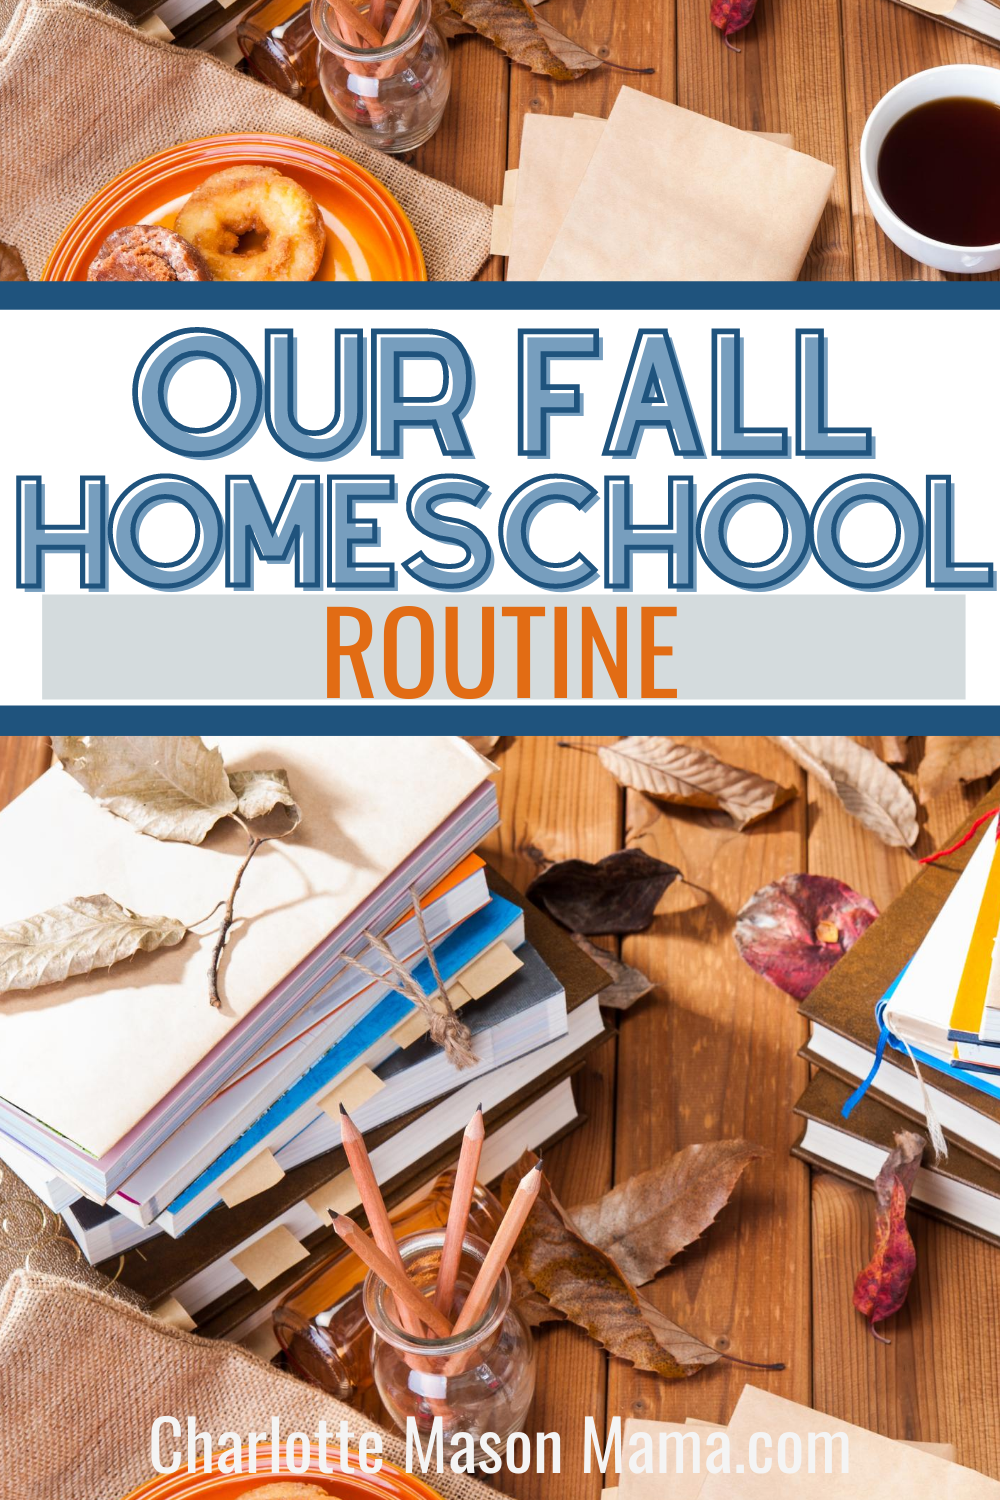 Our Fall Homeschool Routine